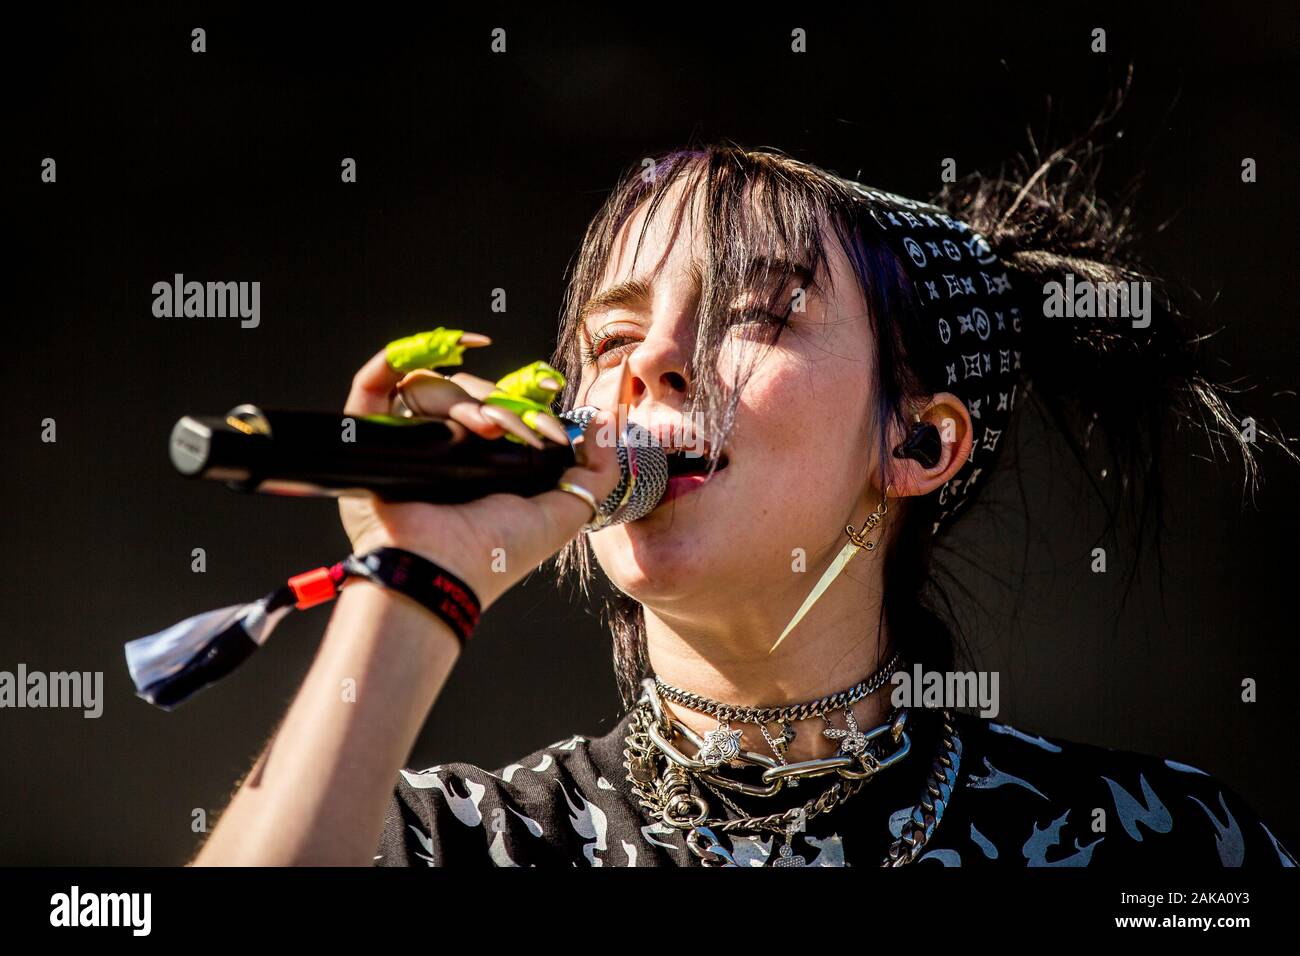 Odense, Denmark. 27th, June 2019. The American singer and songwriter Billie Eilish performs a live concert during the Danish music festival Tinderbox 2019 in Odense. (Photo credit: Gonzales Photo - Lasse Lagoni). Stock Photo